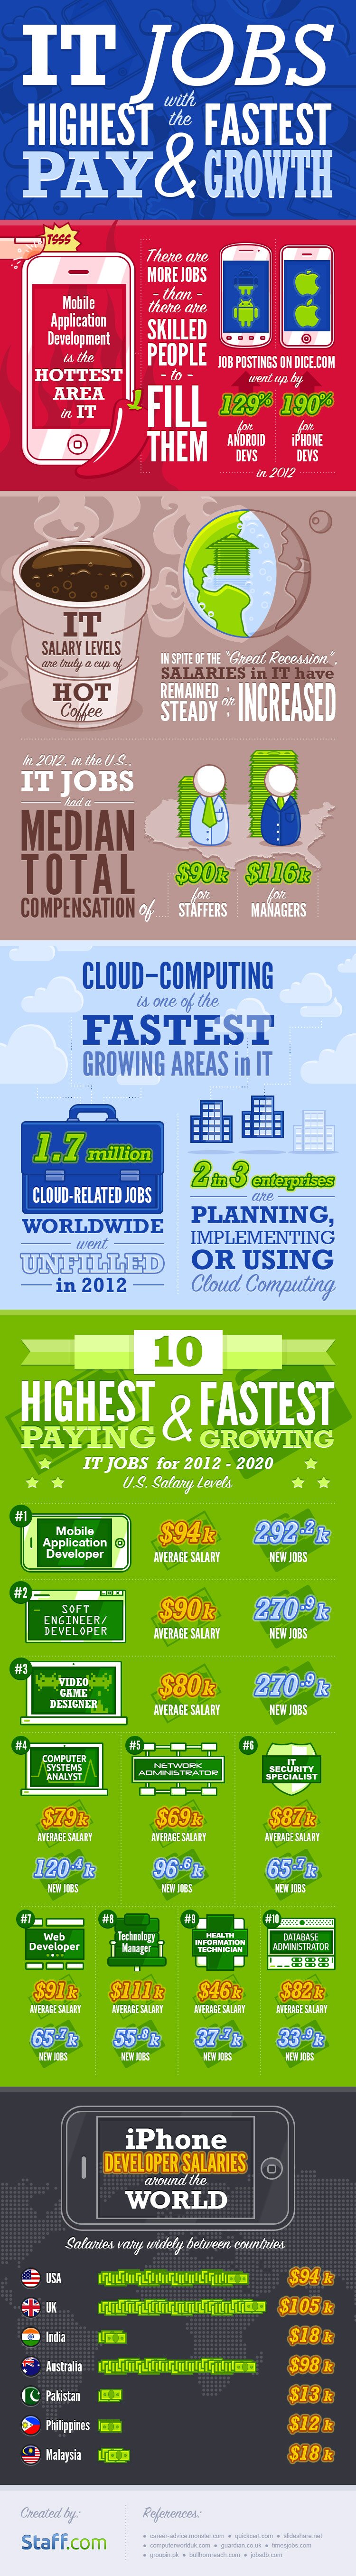 The bigger version of IT Jobs with the Highest Pay and Fastest Growth